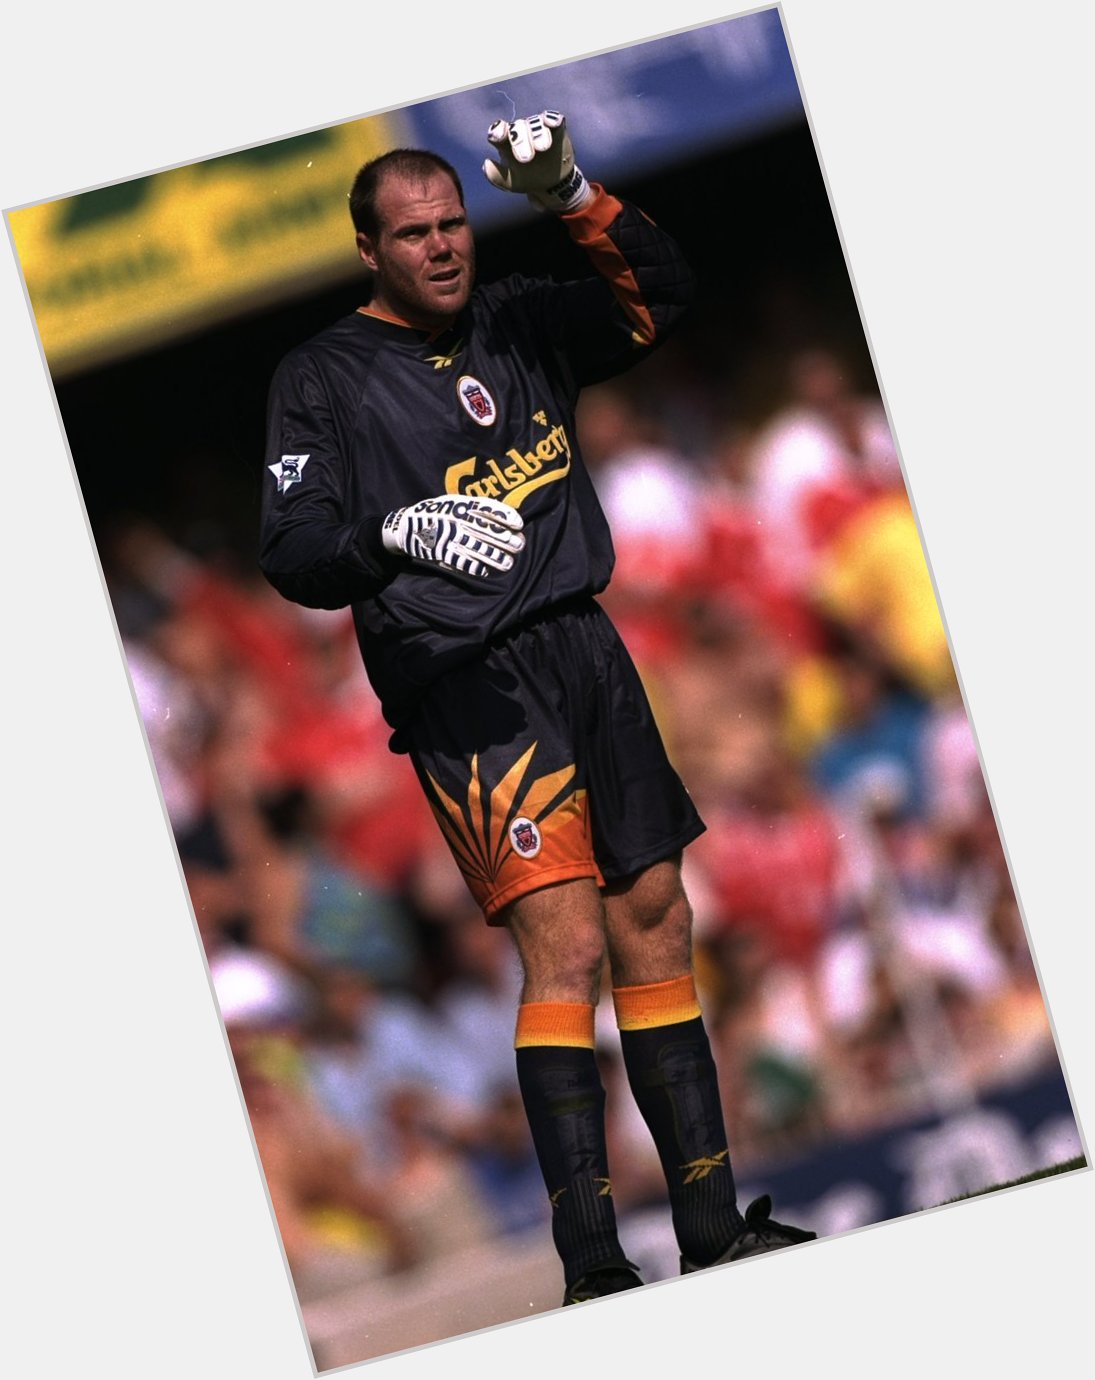 He\s a Red (white and blue)

Happy Birthday to Brad Friedel   